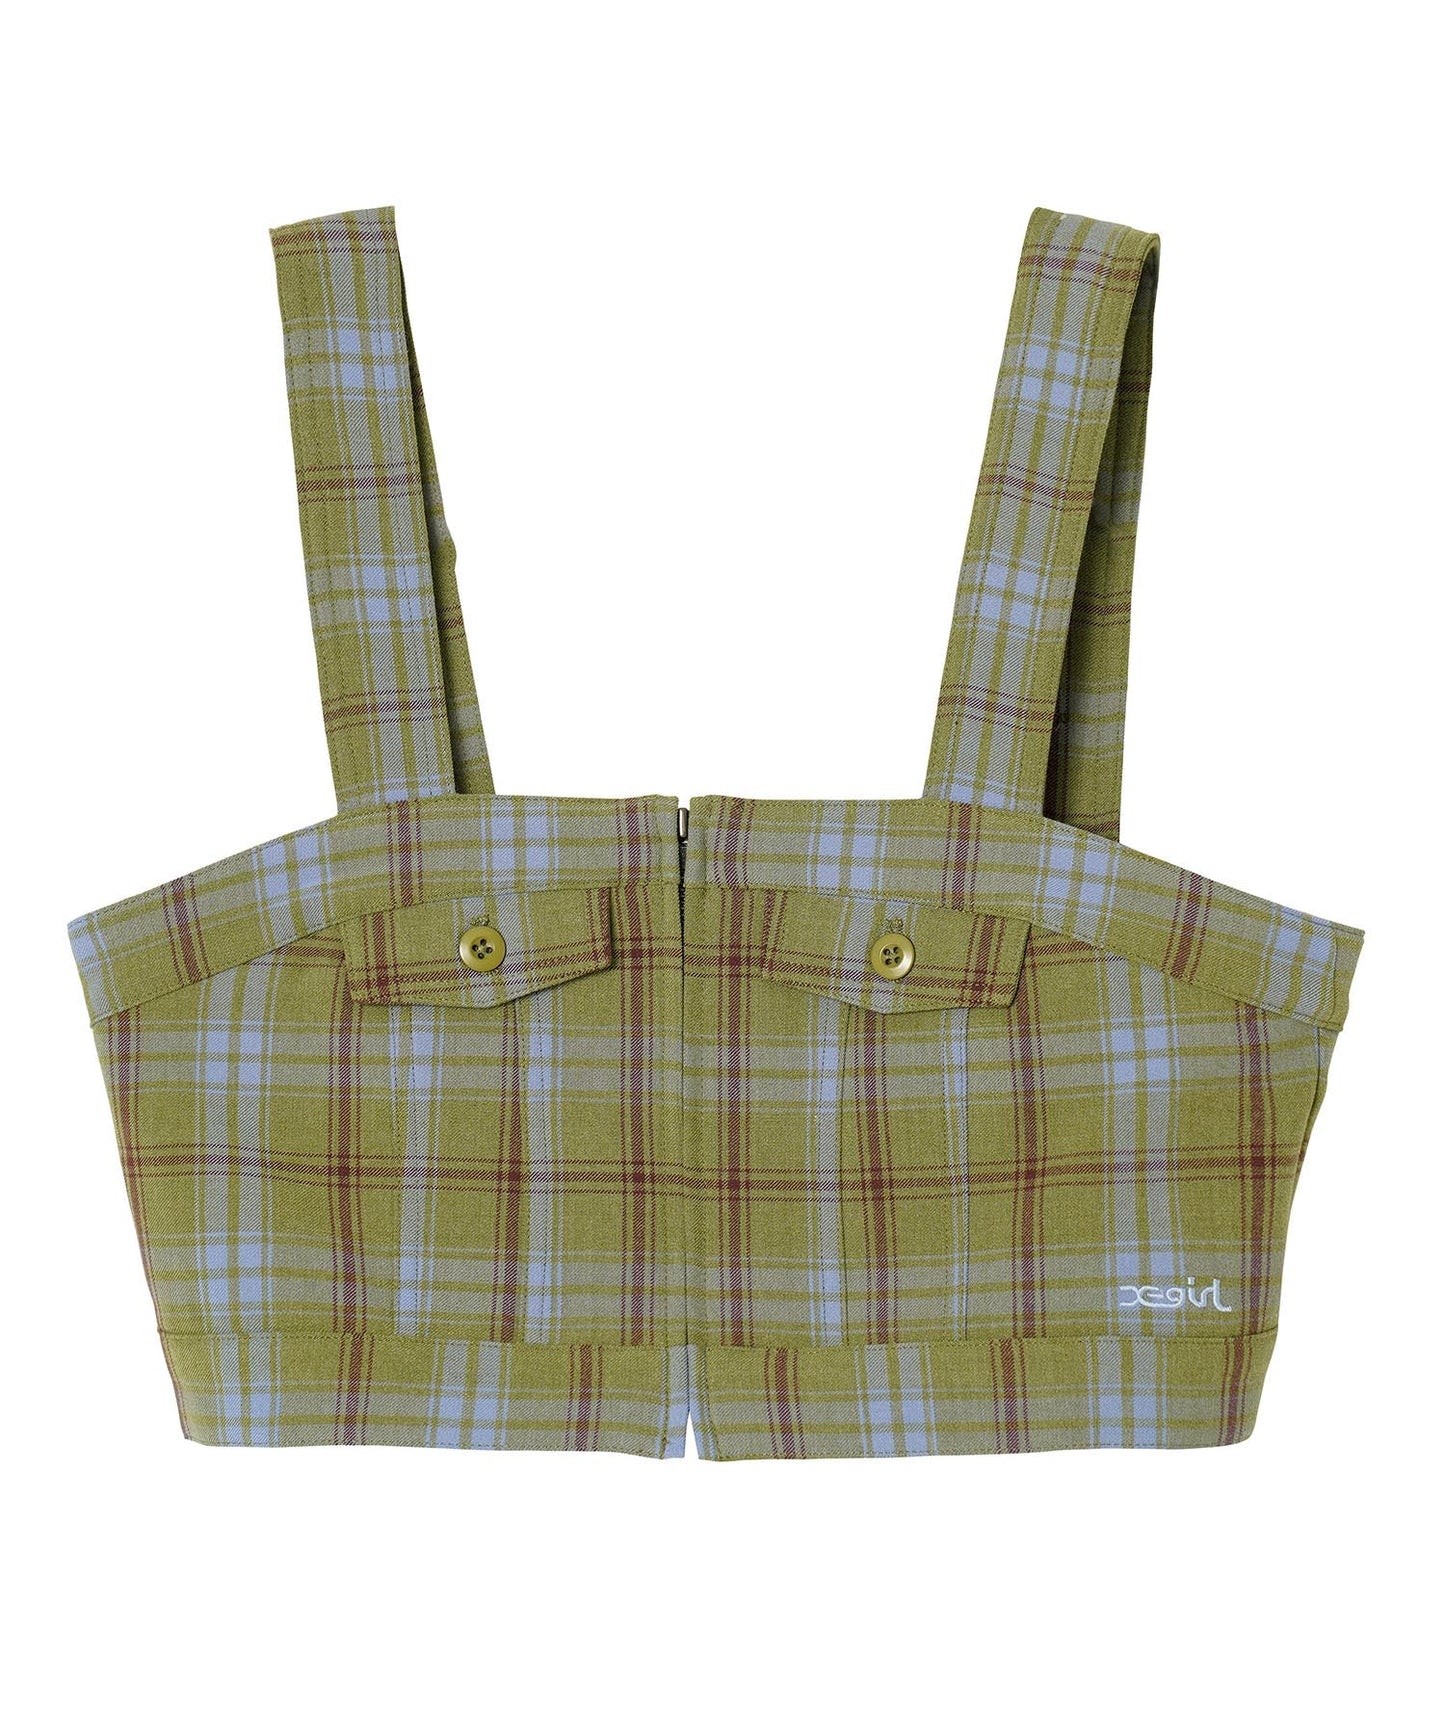 Shop the X-girl Plaid Bustier Top - Real Girls' Streetwear at X-girl Online  Store